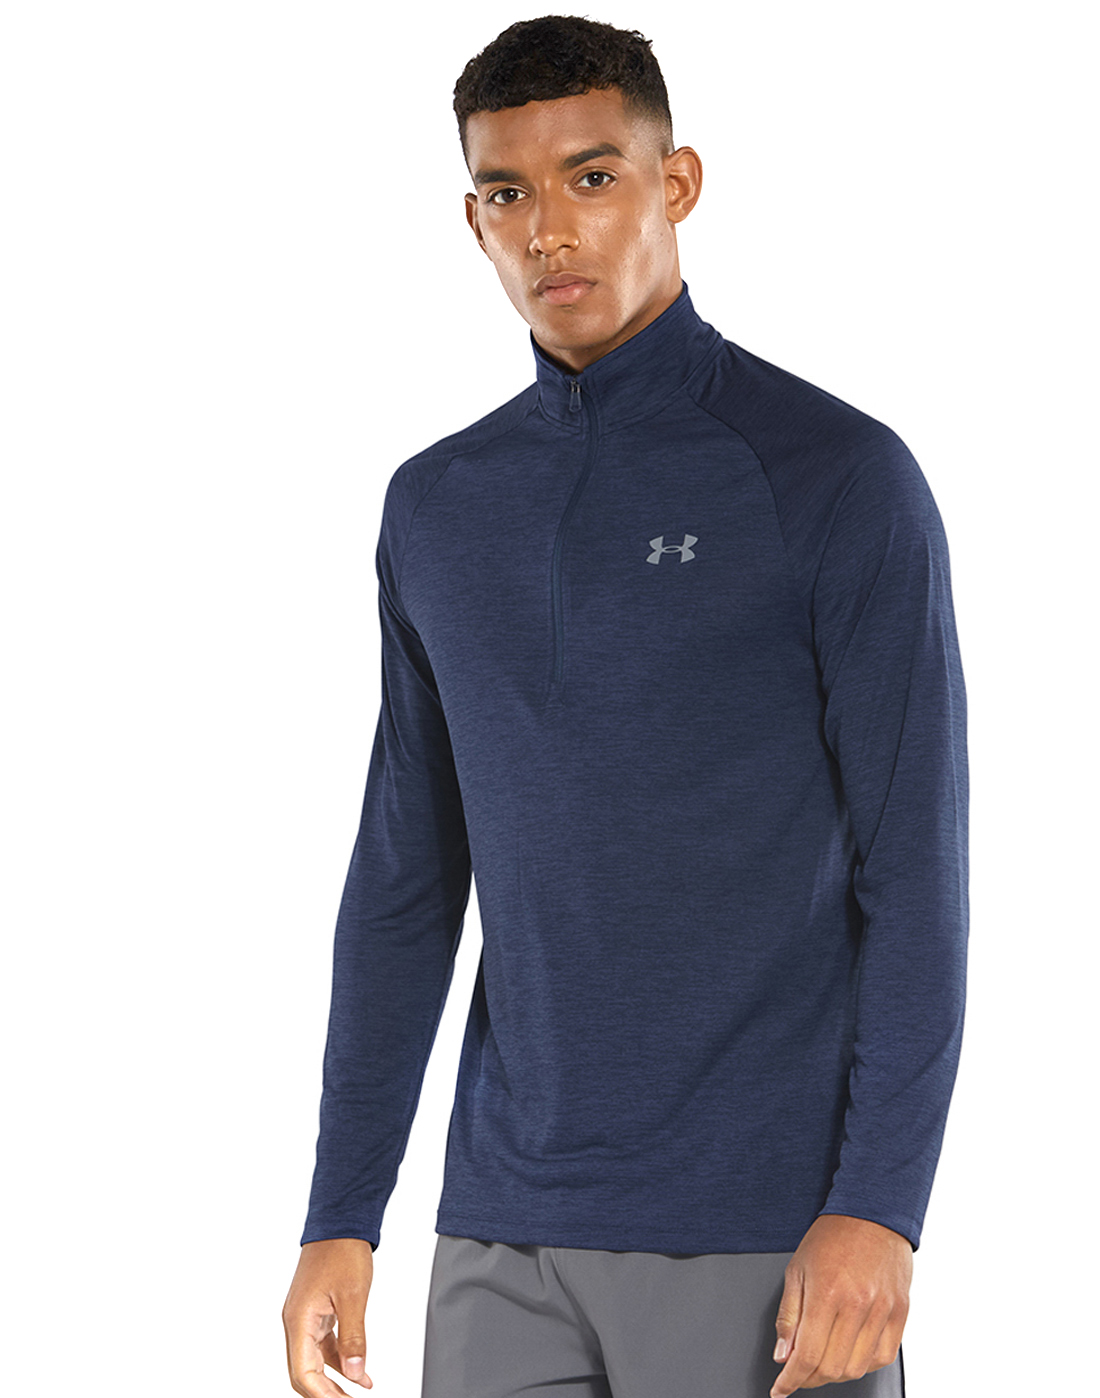 Under Armour Mens UA Tech 1/2 Zip Sweater Mens Training Breathable GYM Top 